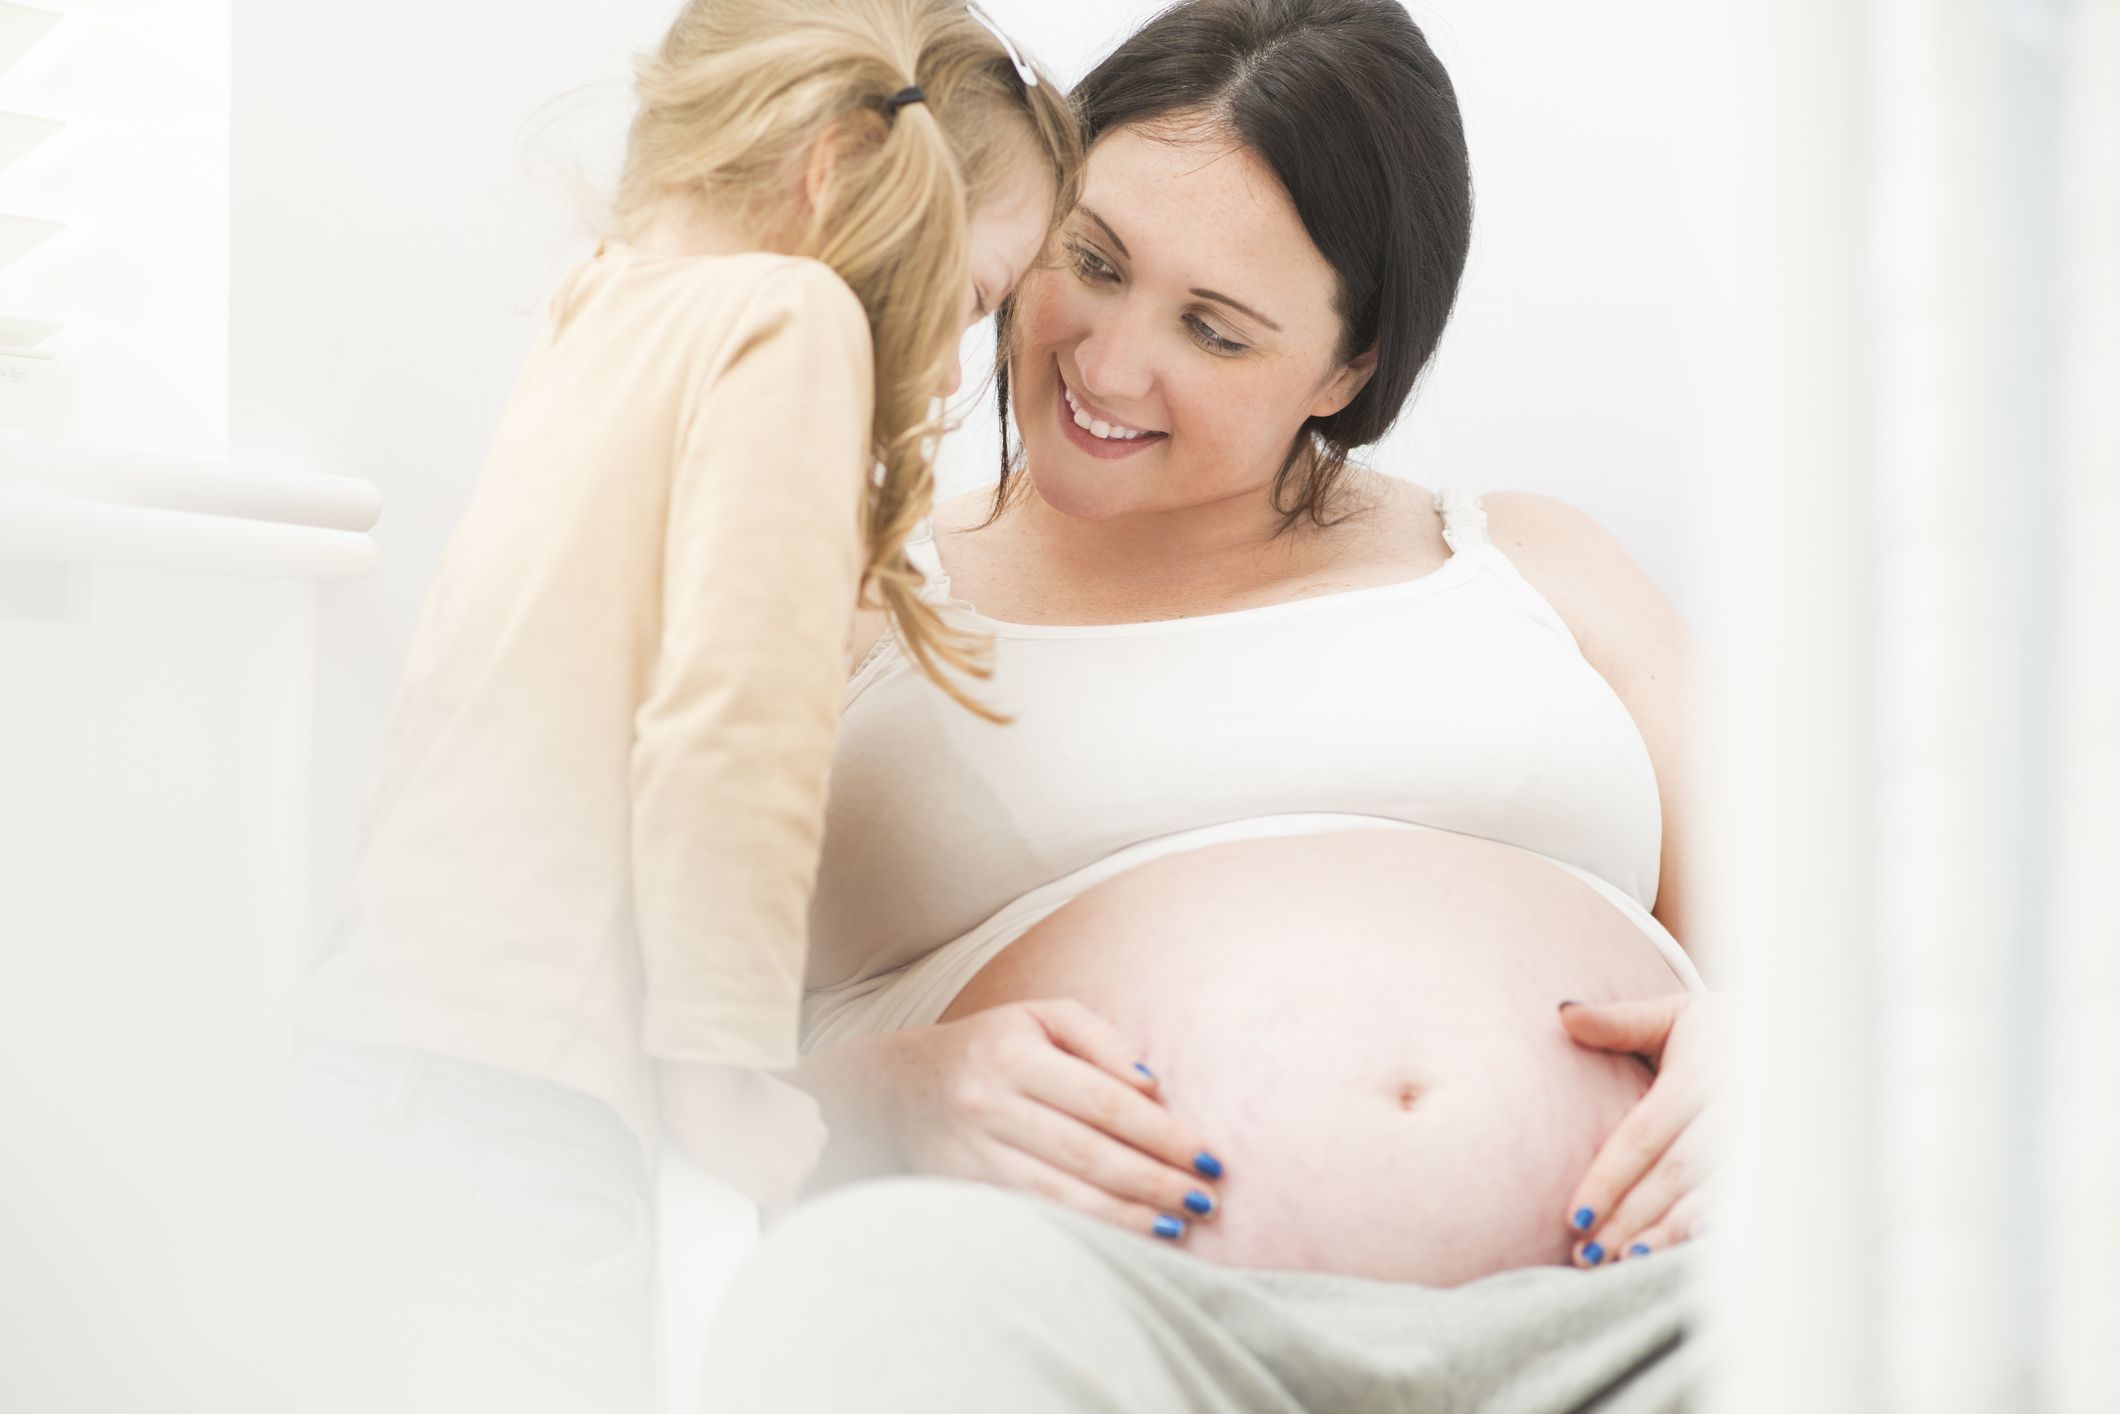 Mother and daughter in maternity photos